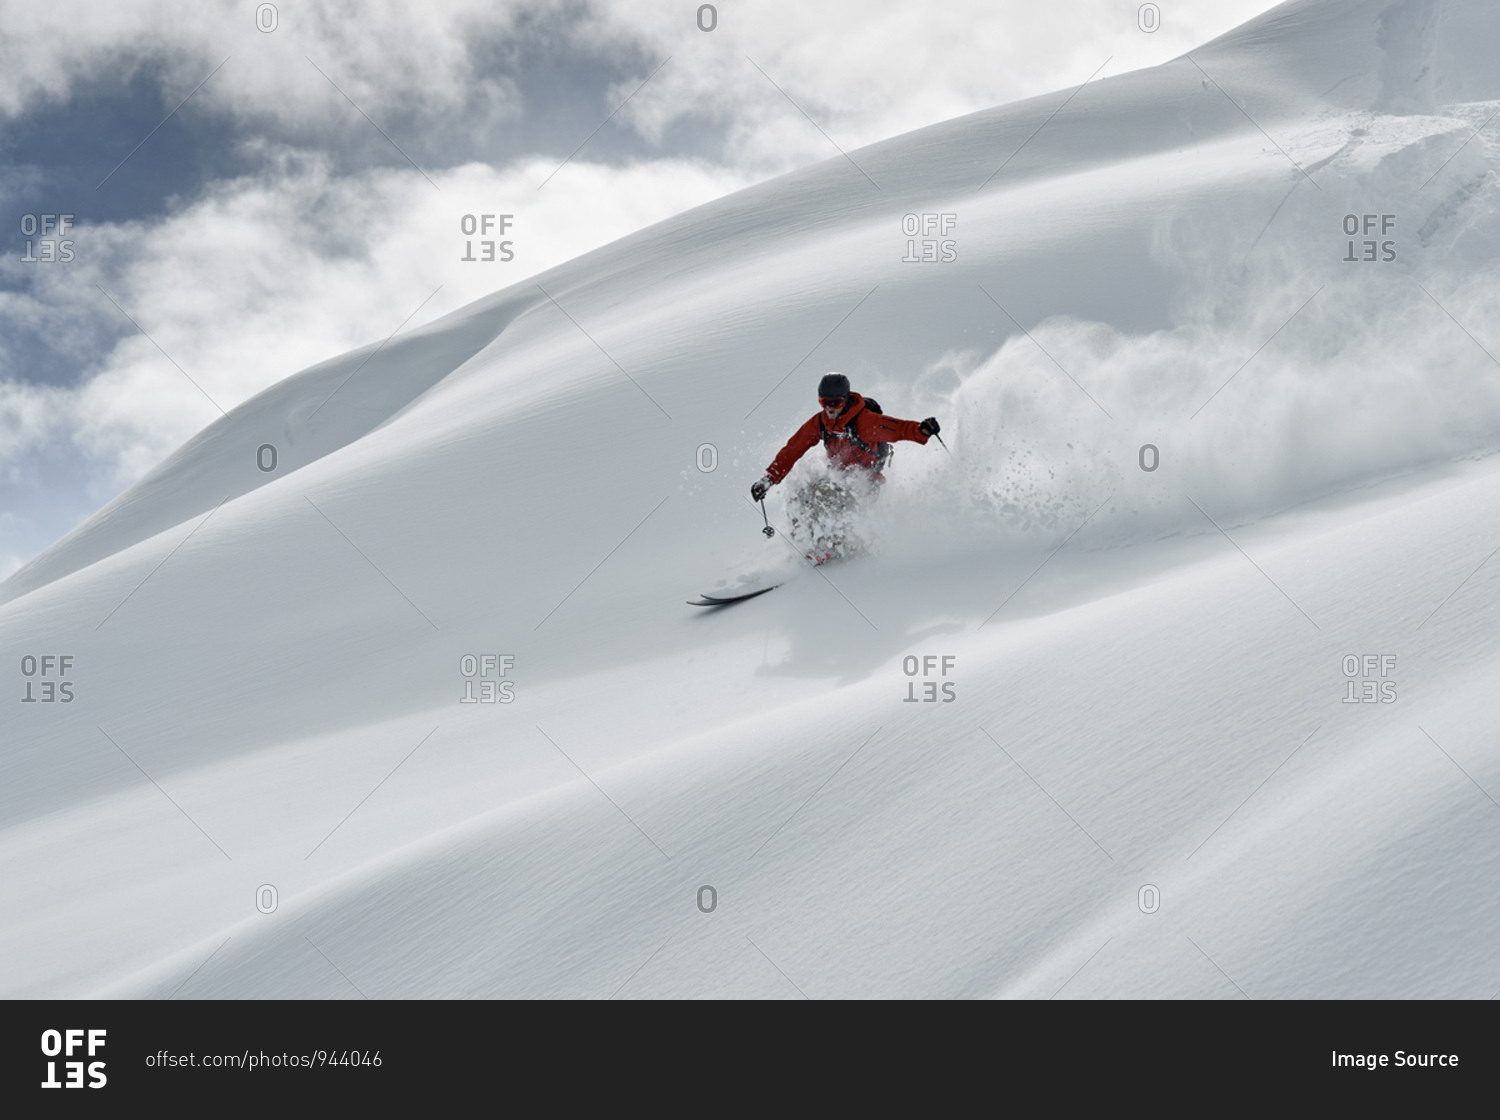 Male skier skiing down snow covered mountain, Alpe-d'Huez, Rhone-Alpes, France